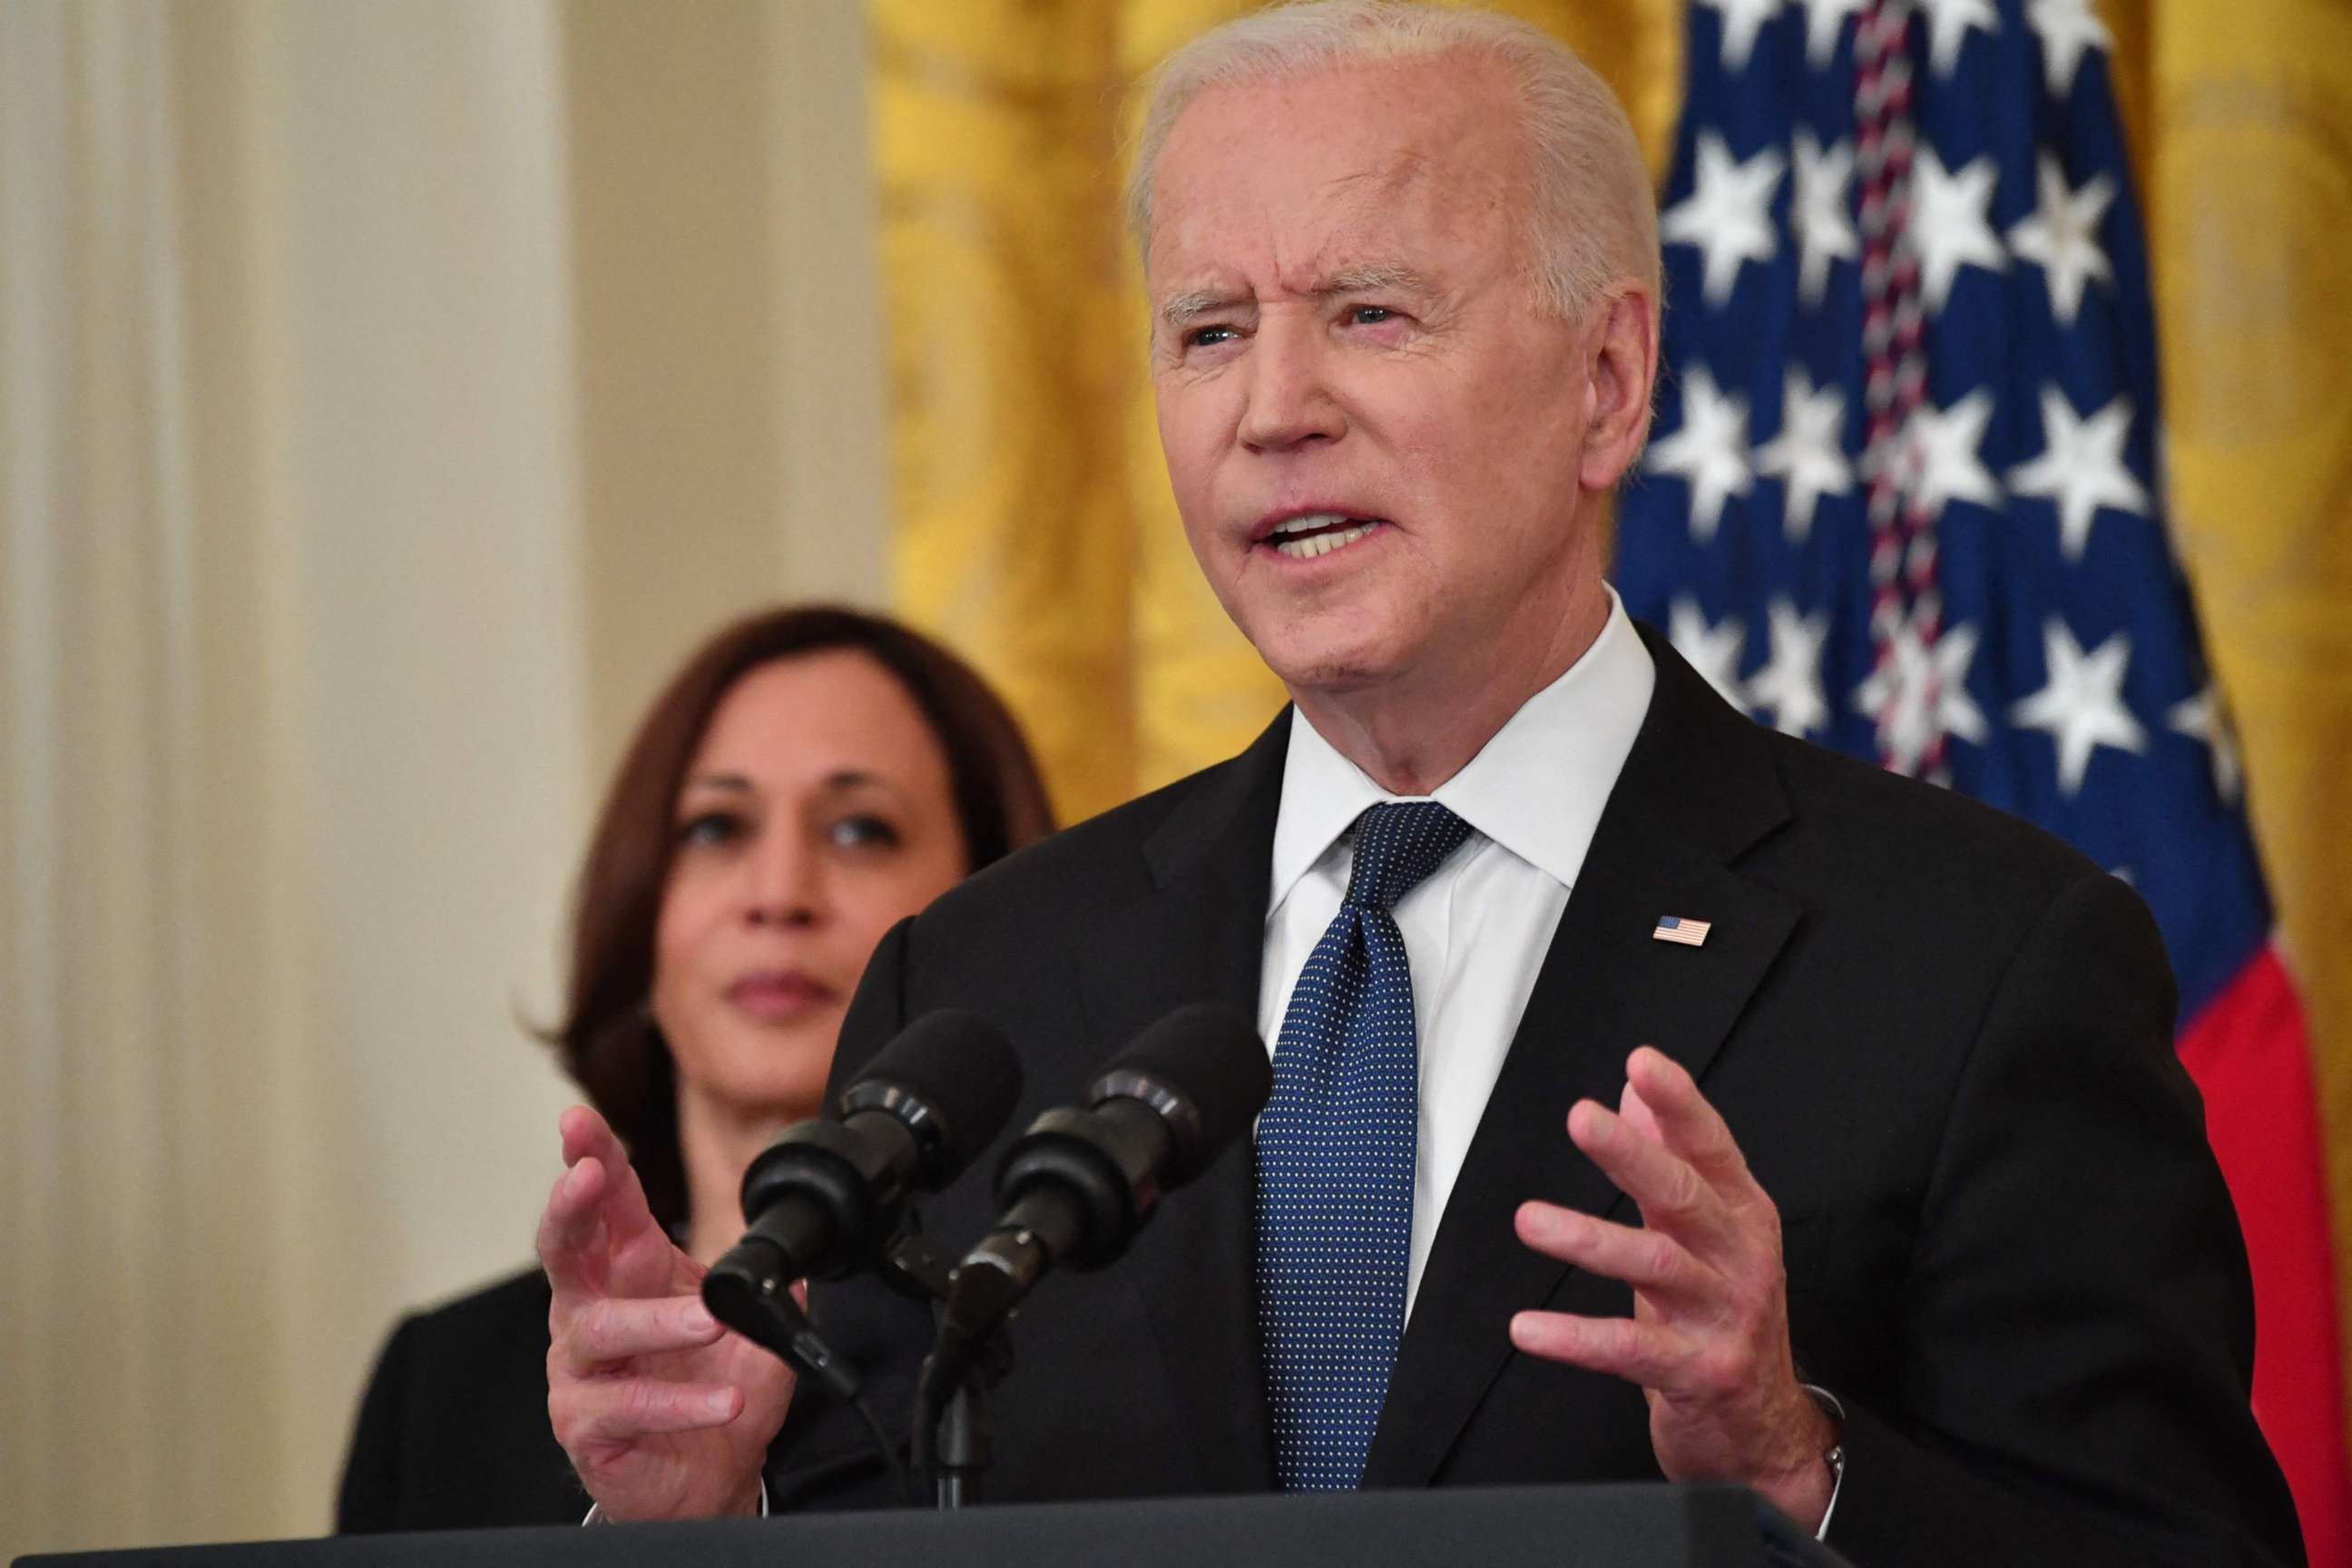 PHOTO: Vice President Kamala Harris looks on as President Joe Biden speaks before signing the COVID-19 Hate Crimes Act, in the East Room of the White House in Washington, D.C., on May 20, 2021.